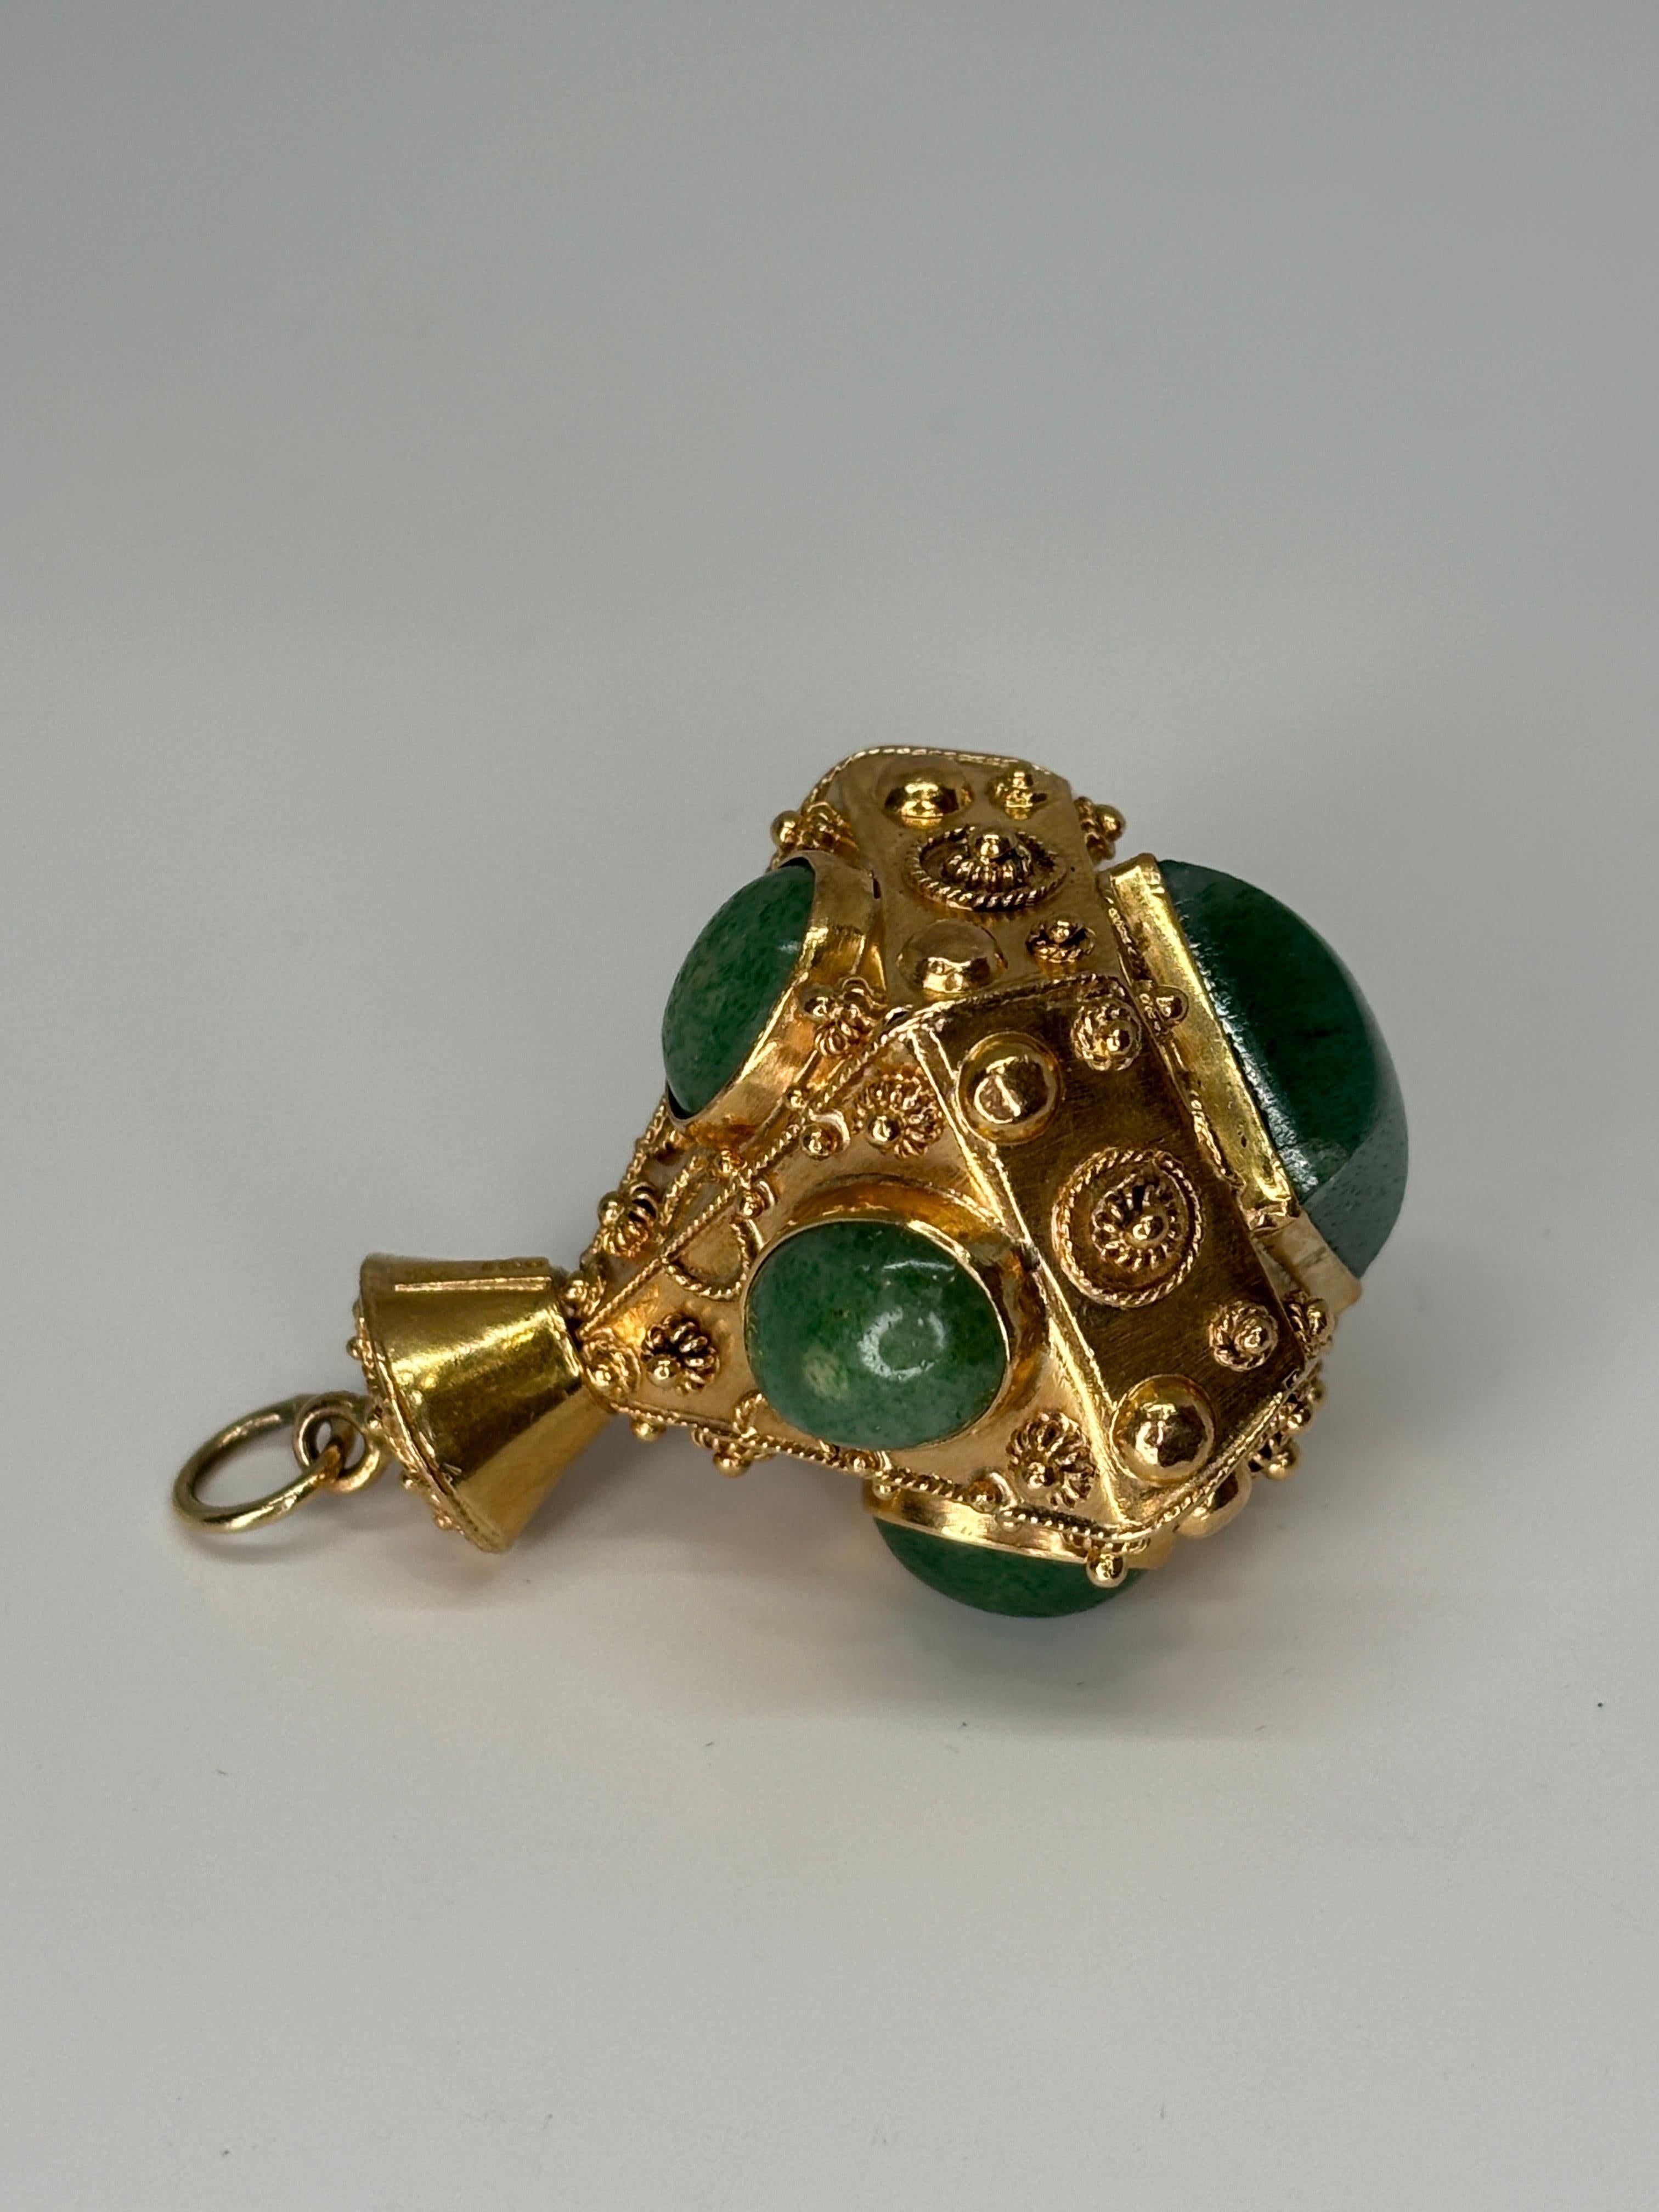 Large Italian 18k Gold Aventurine Etruscan Revival Watch Fob Pendant Charm For Sale 6